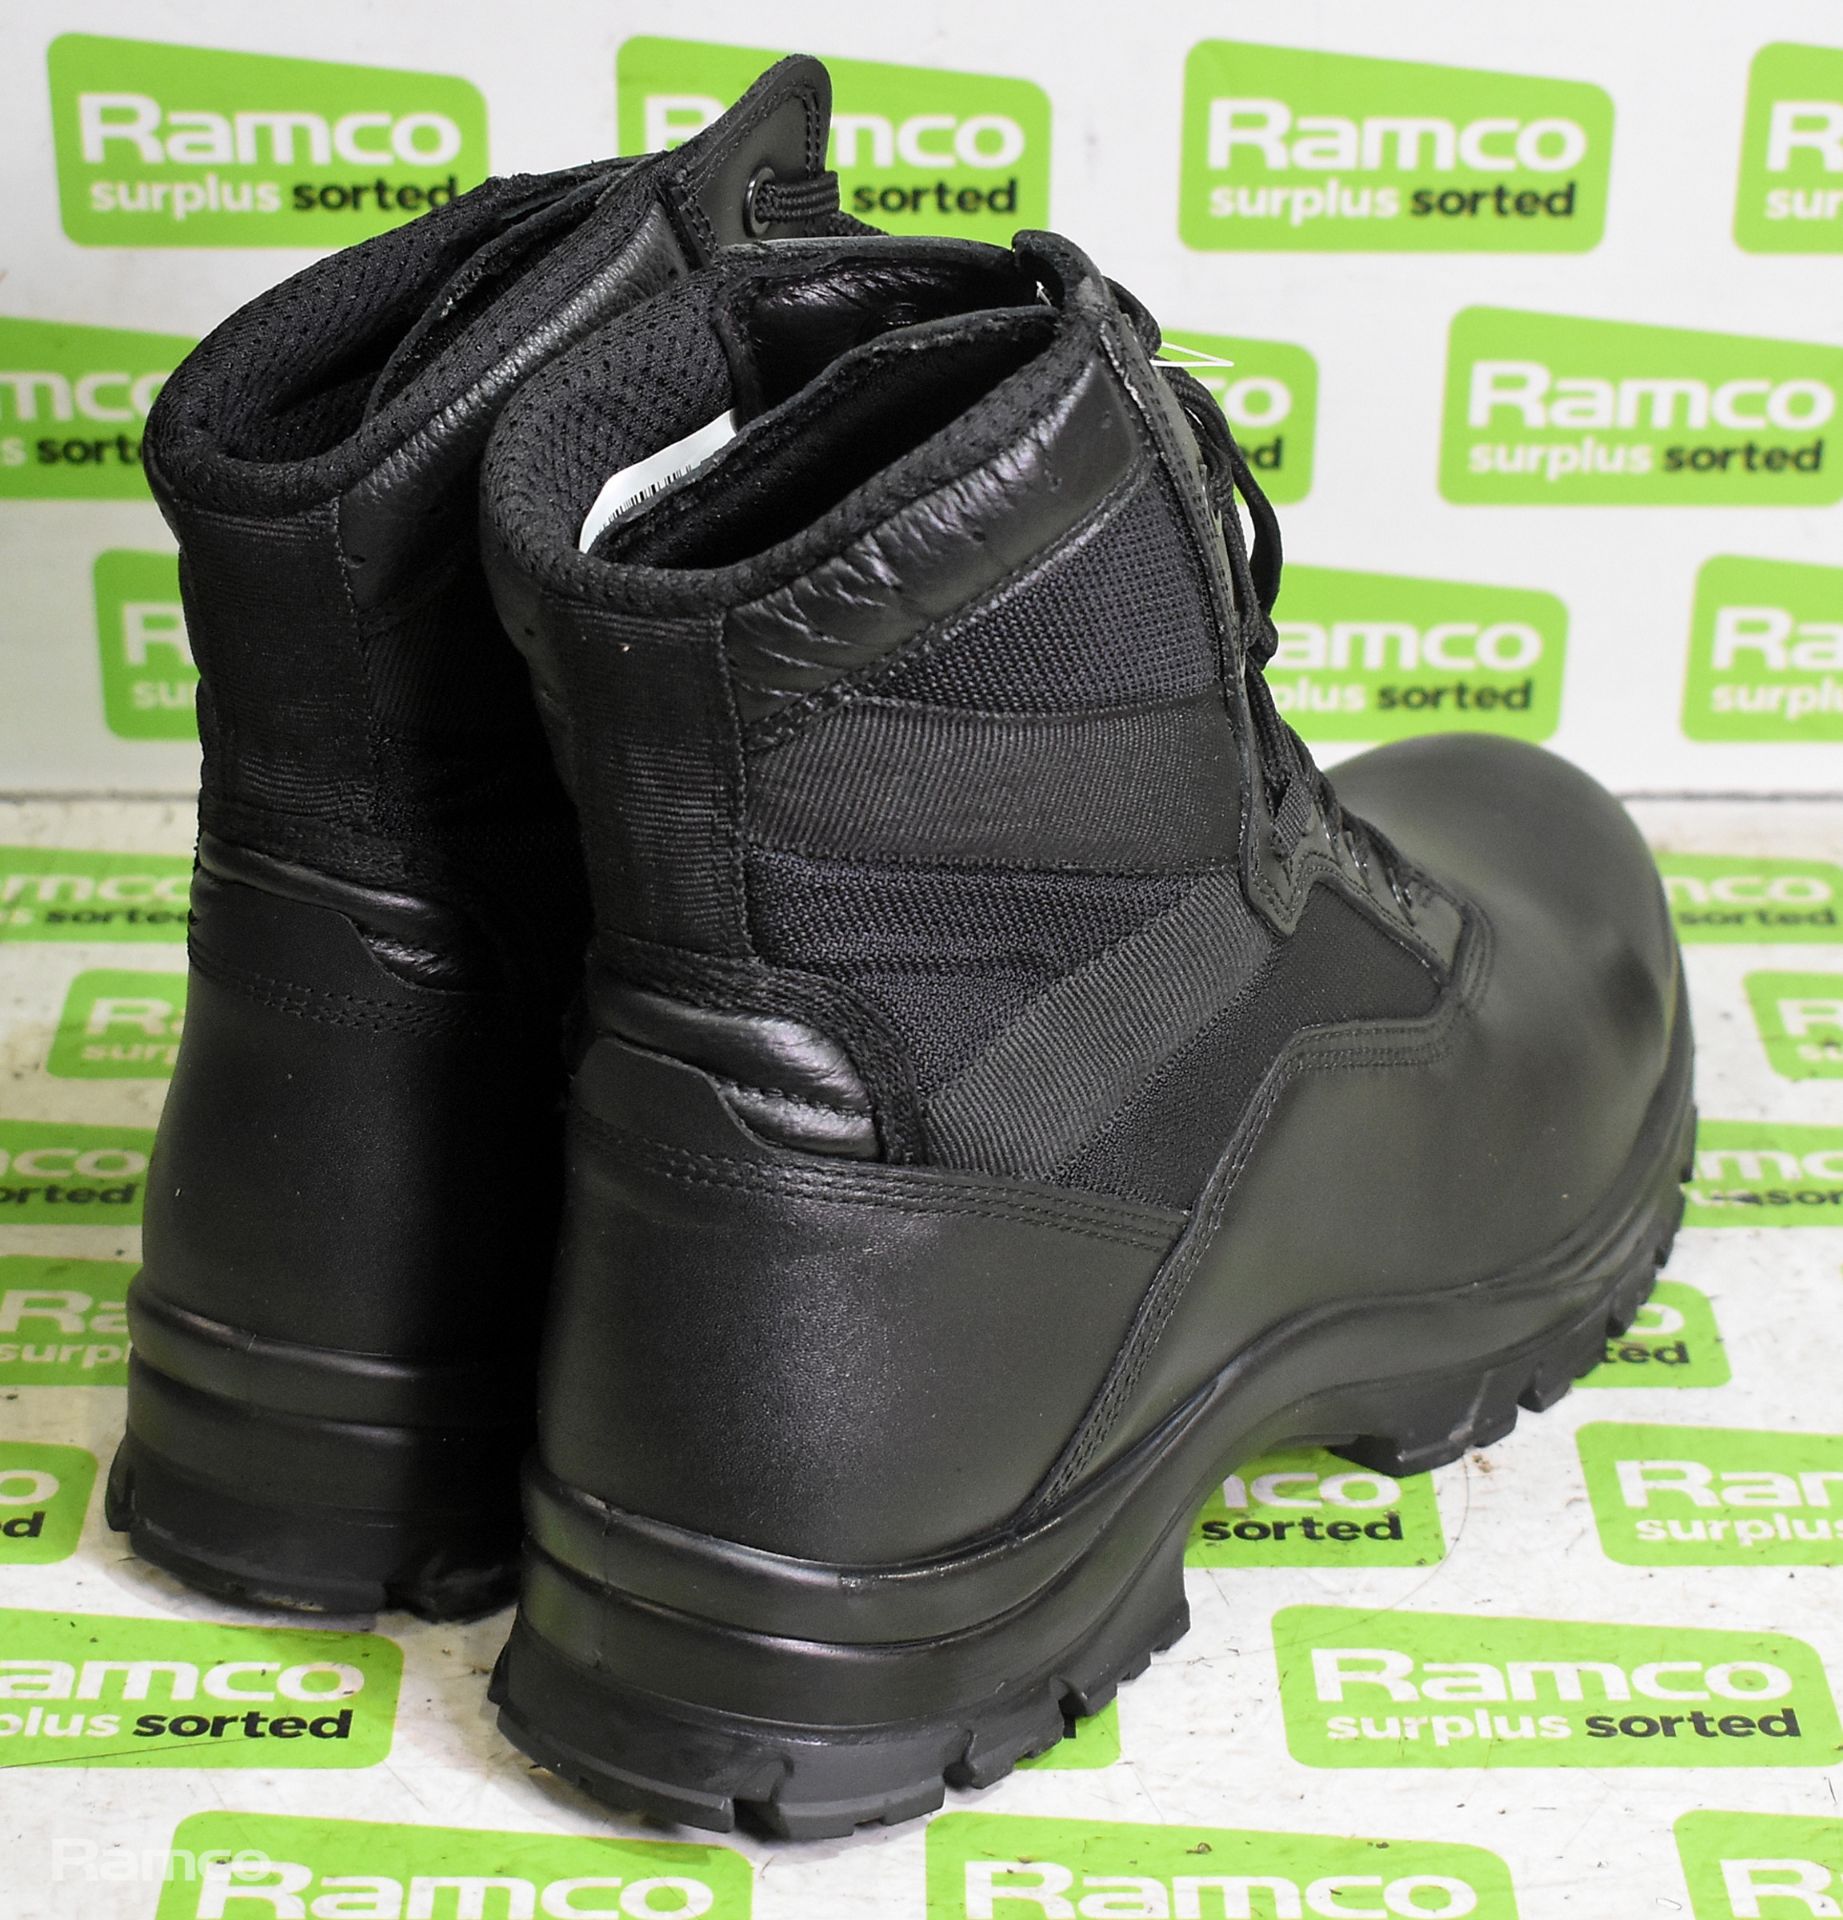 2x pairs of Goliath warm weather boots - Size 11L - Image 3 of 6